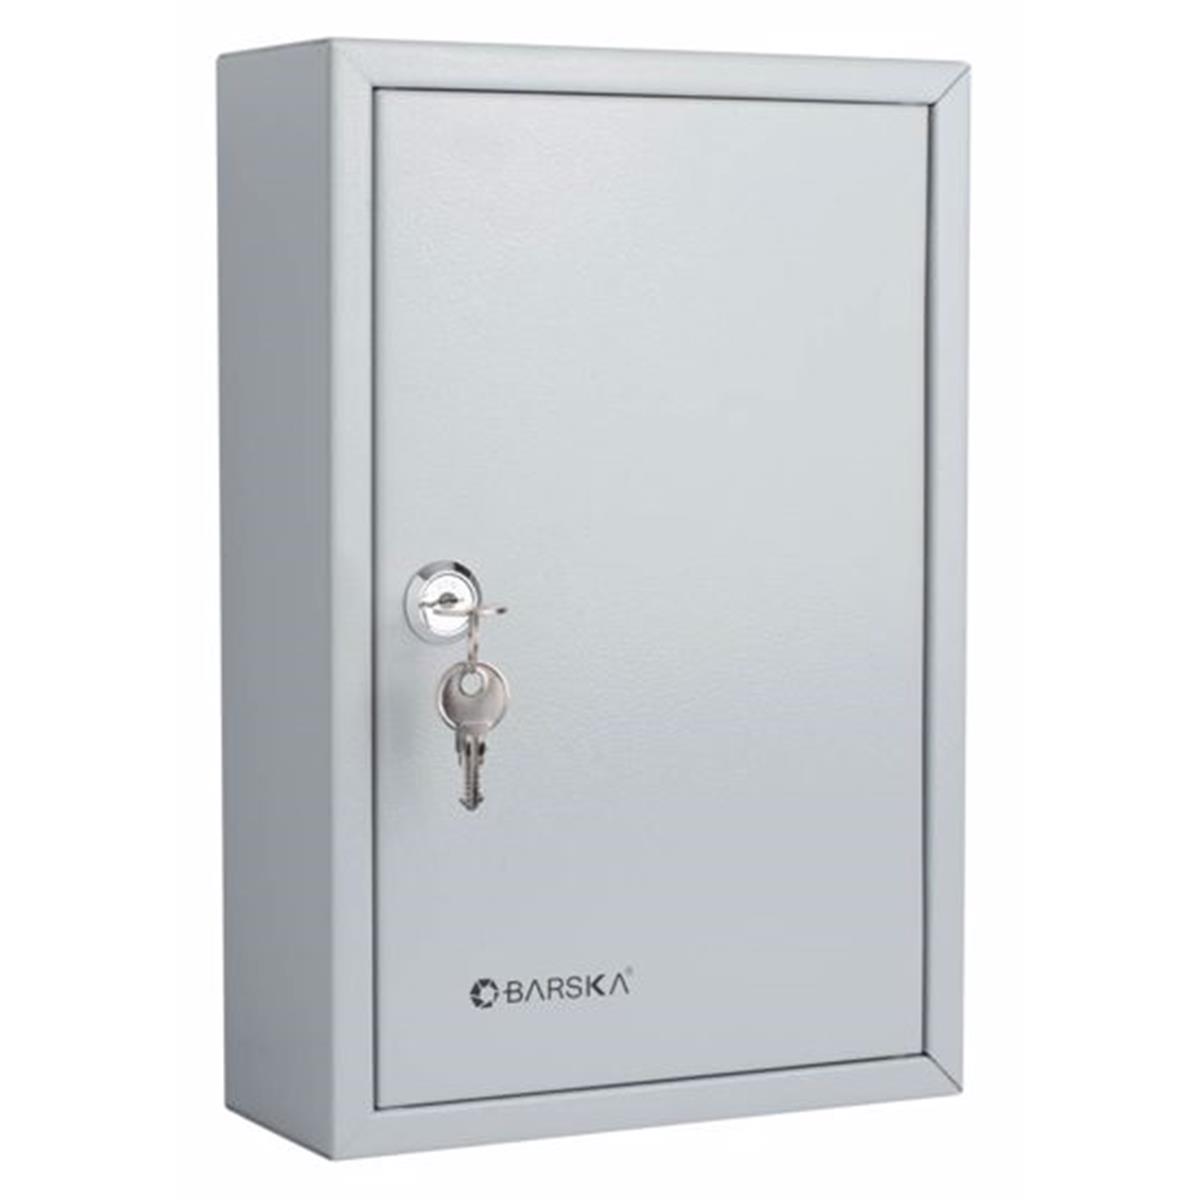 Picture of Barska CB13364 40 Position Key Cabinet with Key Lock - White